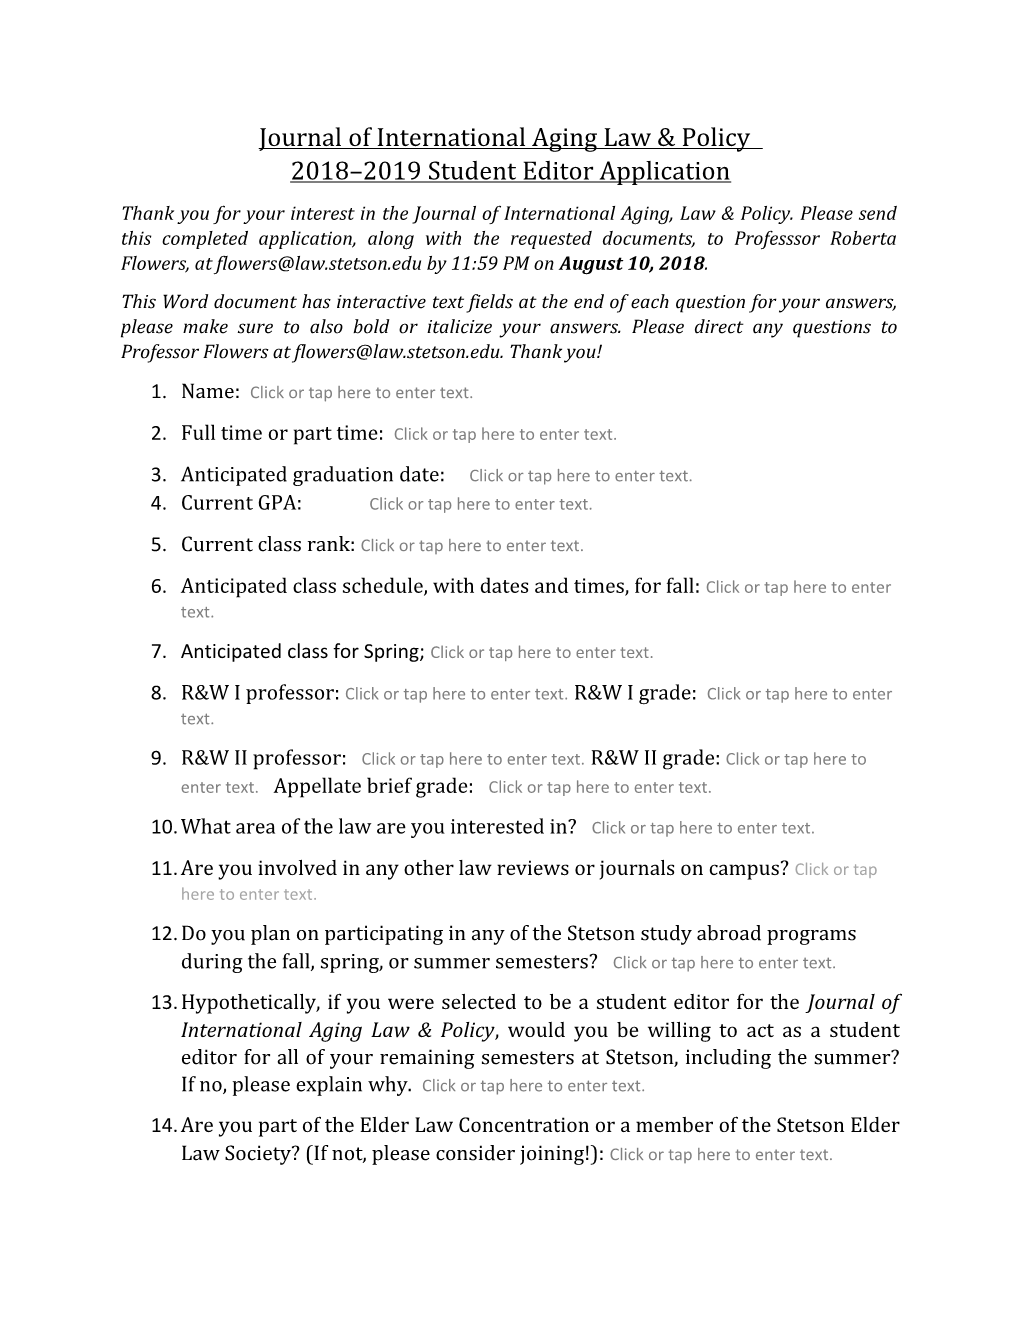 Journal of International Aging Law & Policy 2018 2019 Student Editor Application